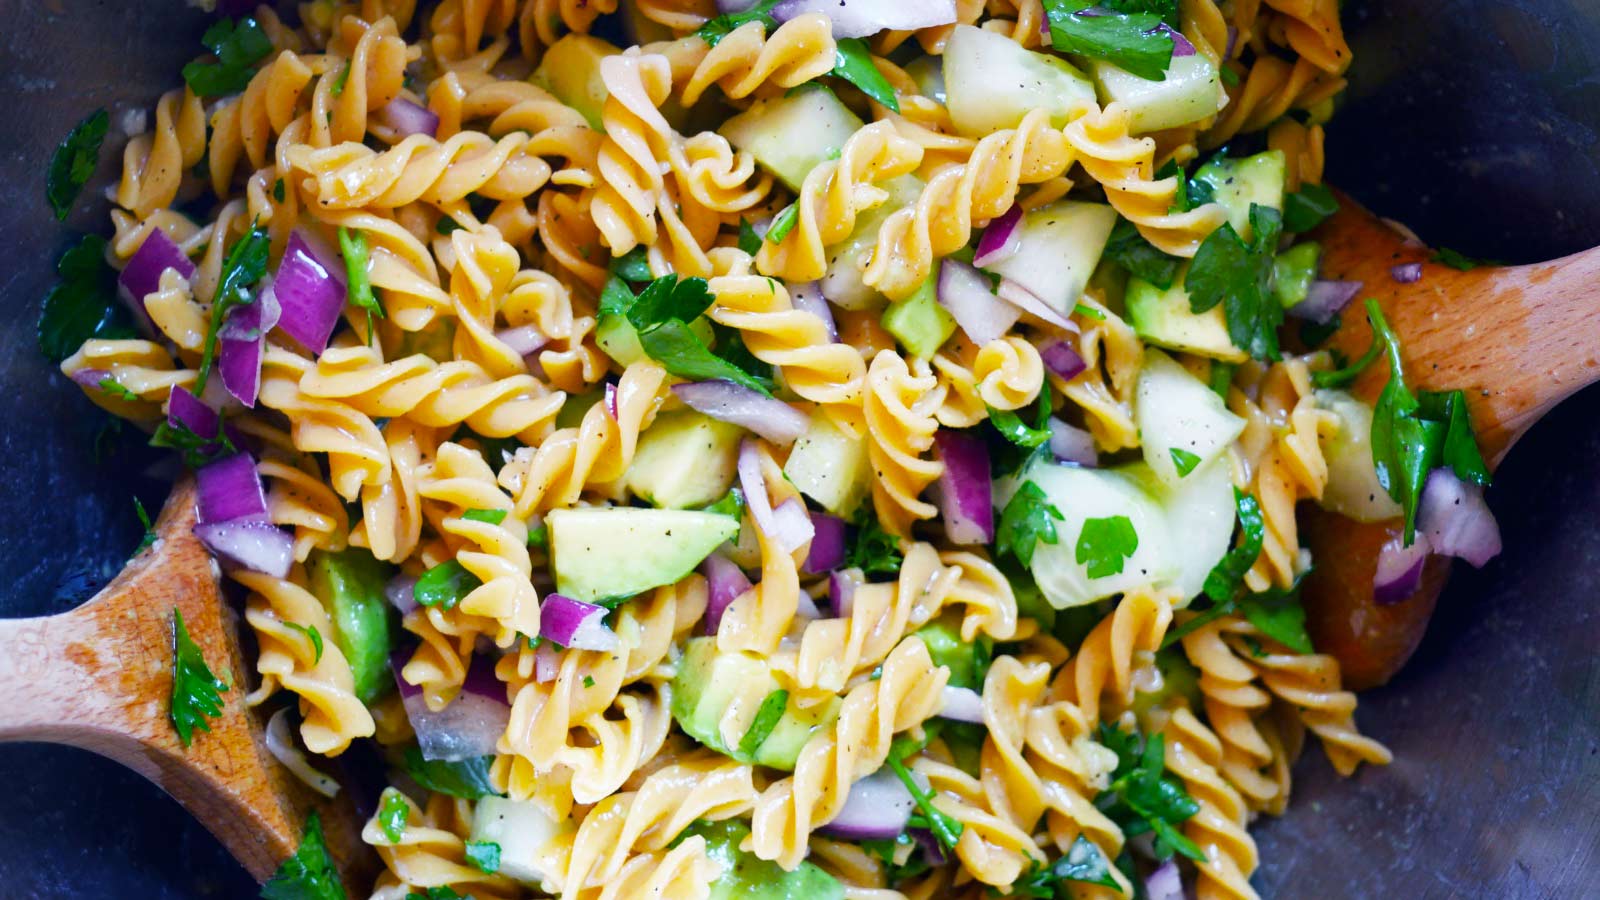 A close up of a large mixing bowl filled with Avocado Pasta Salad.